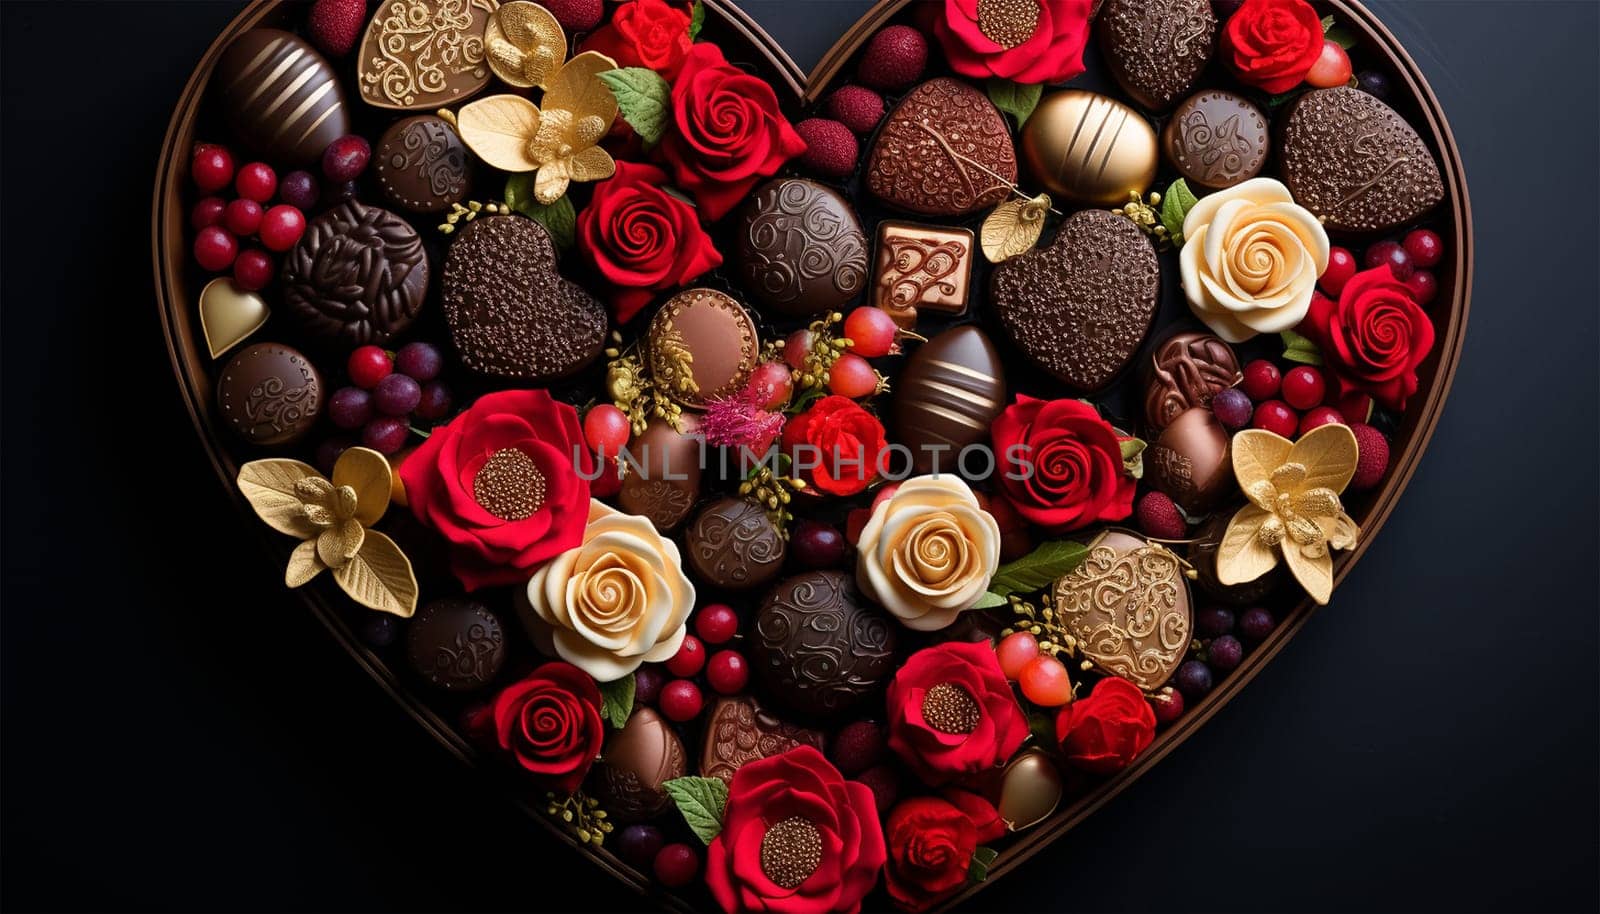 Red heart-shaped box for Valentine's Day, with delicious chocolate and flowers. with dark background to give as a gift. Romantic candies copy space Happy Valentine by Annebel146